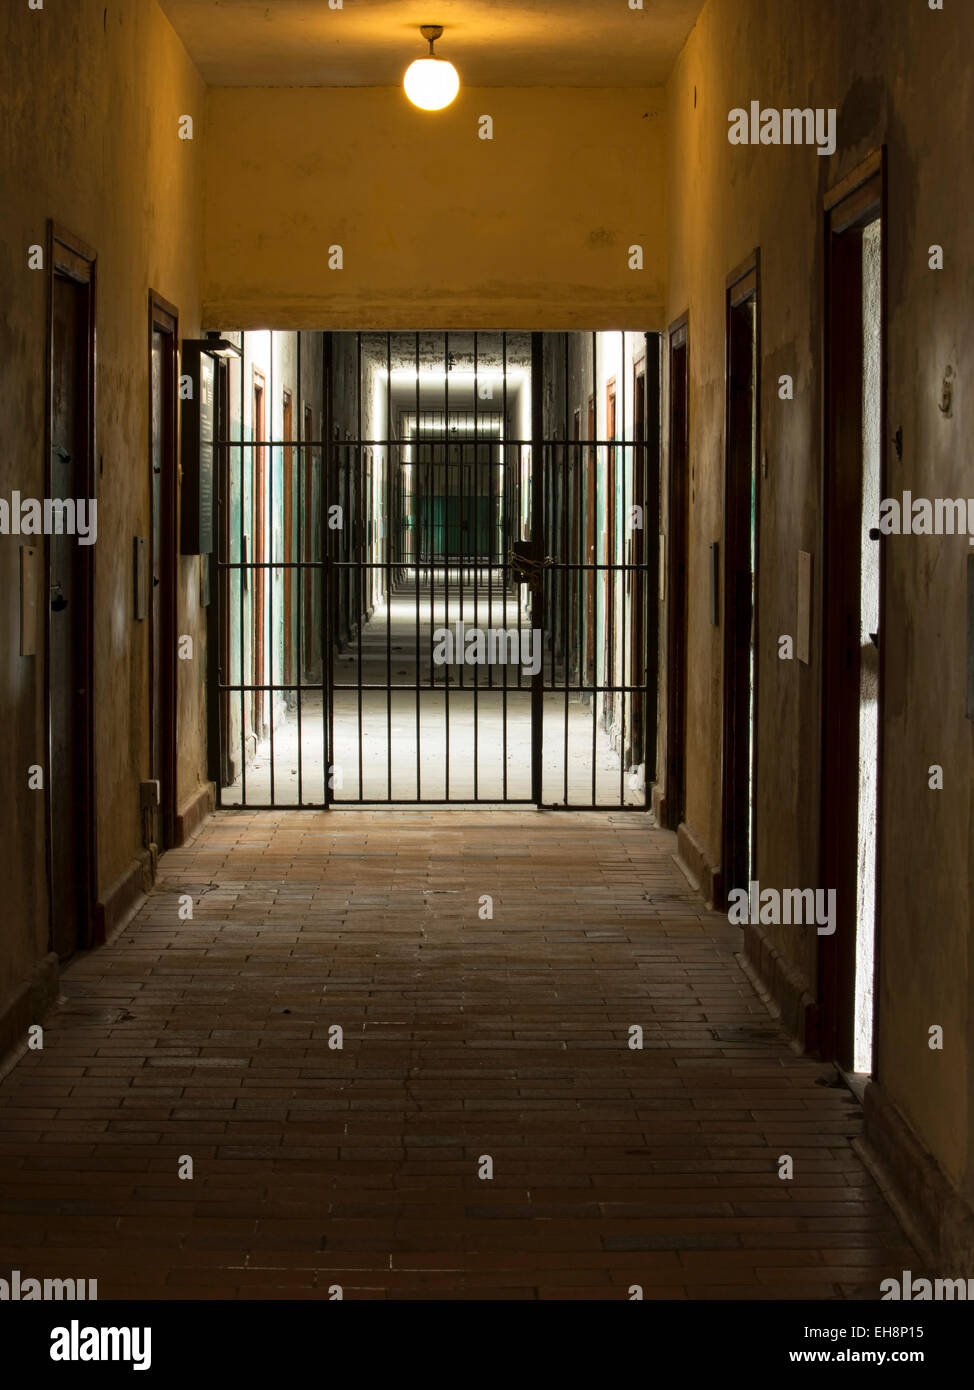 Munich Germany Dachau Concentration Camp jail cells and bars Stock Photo